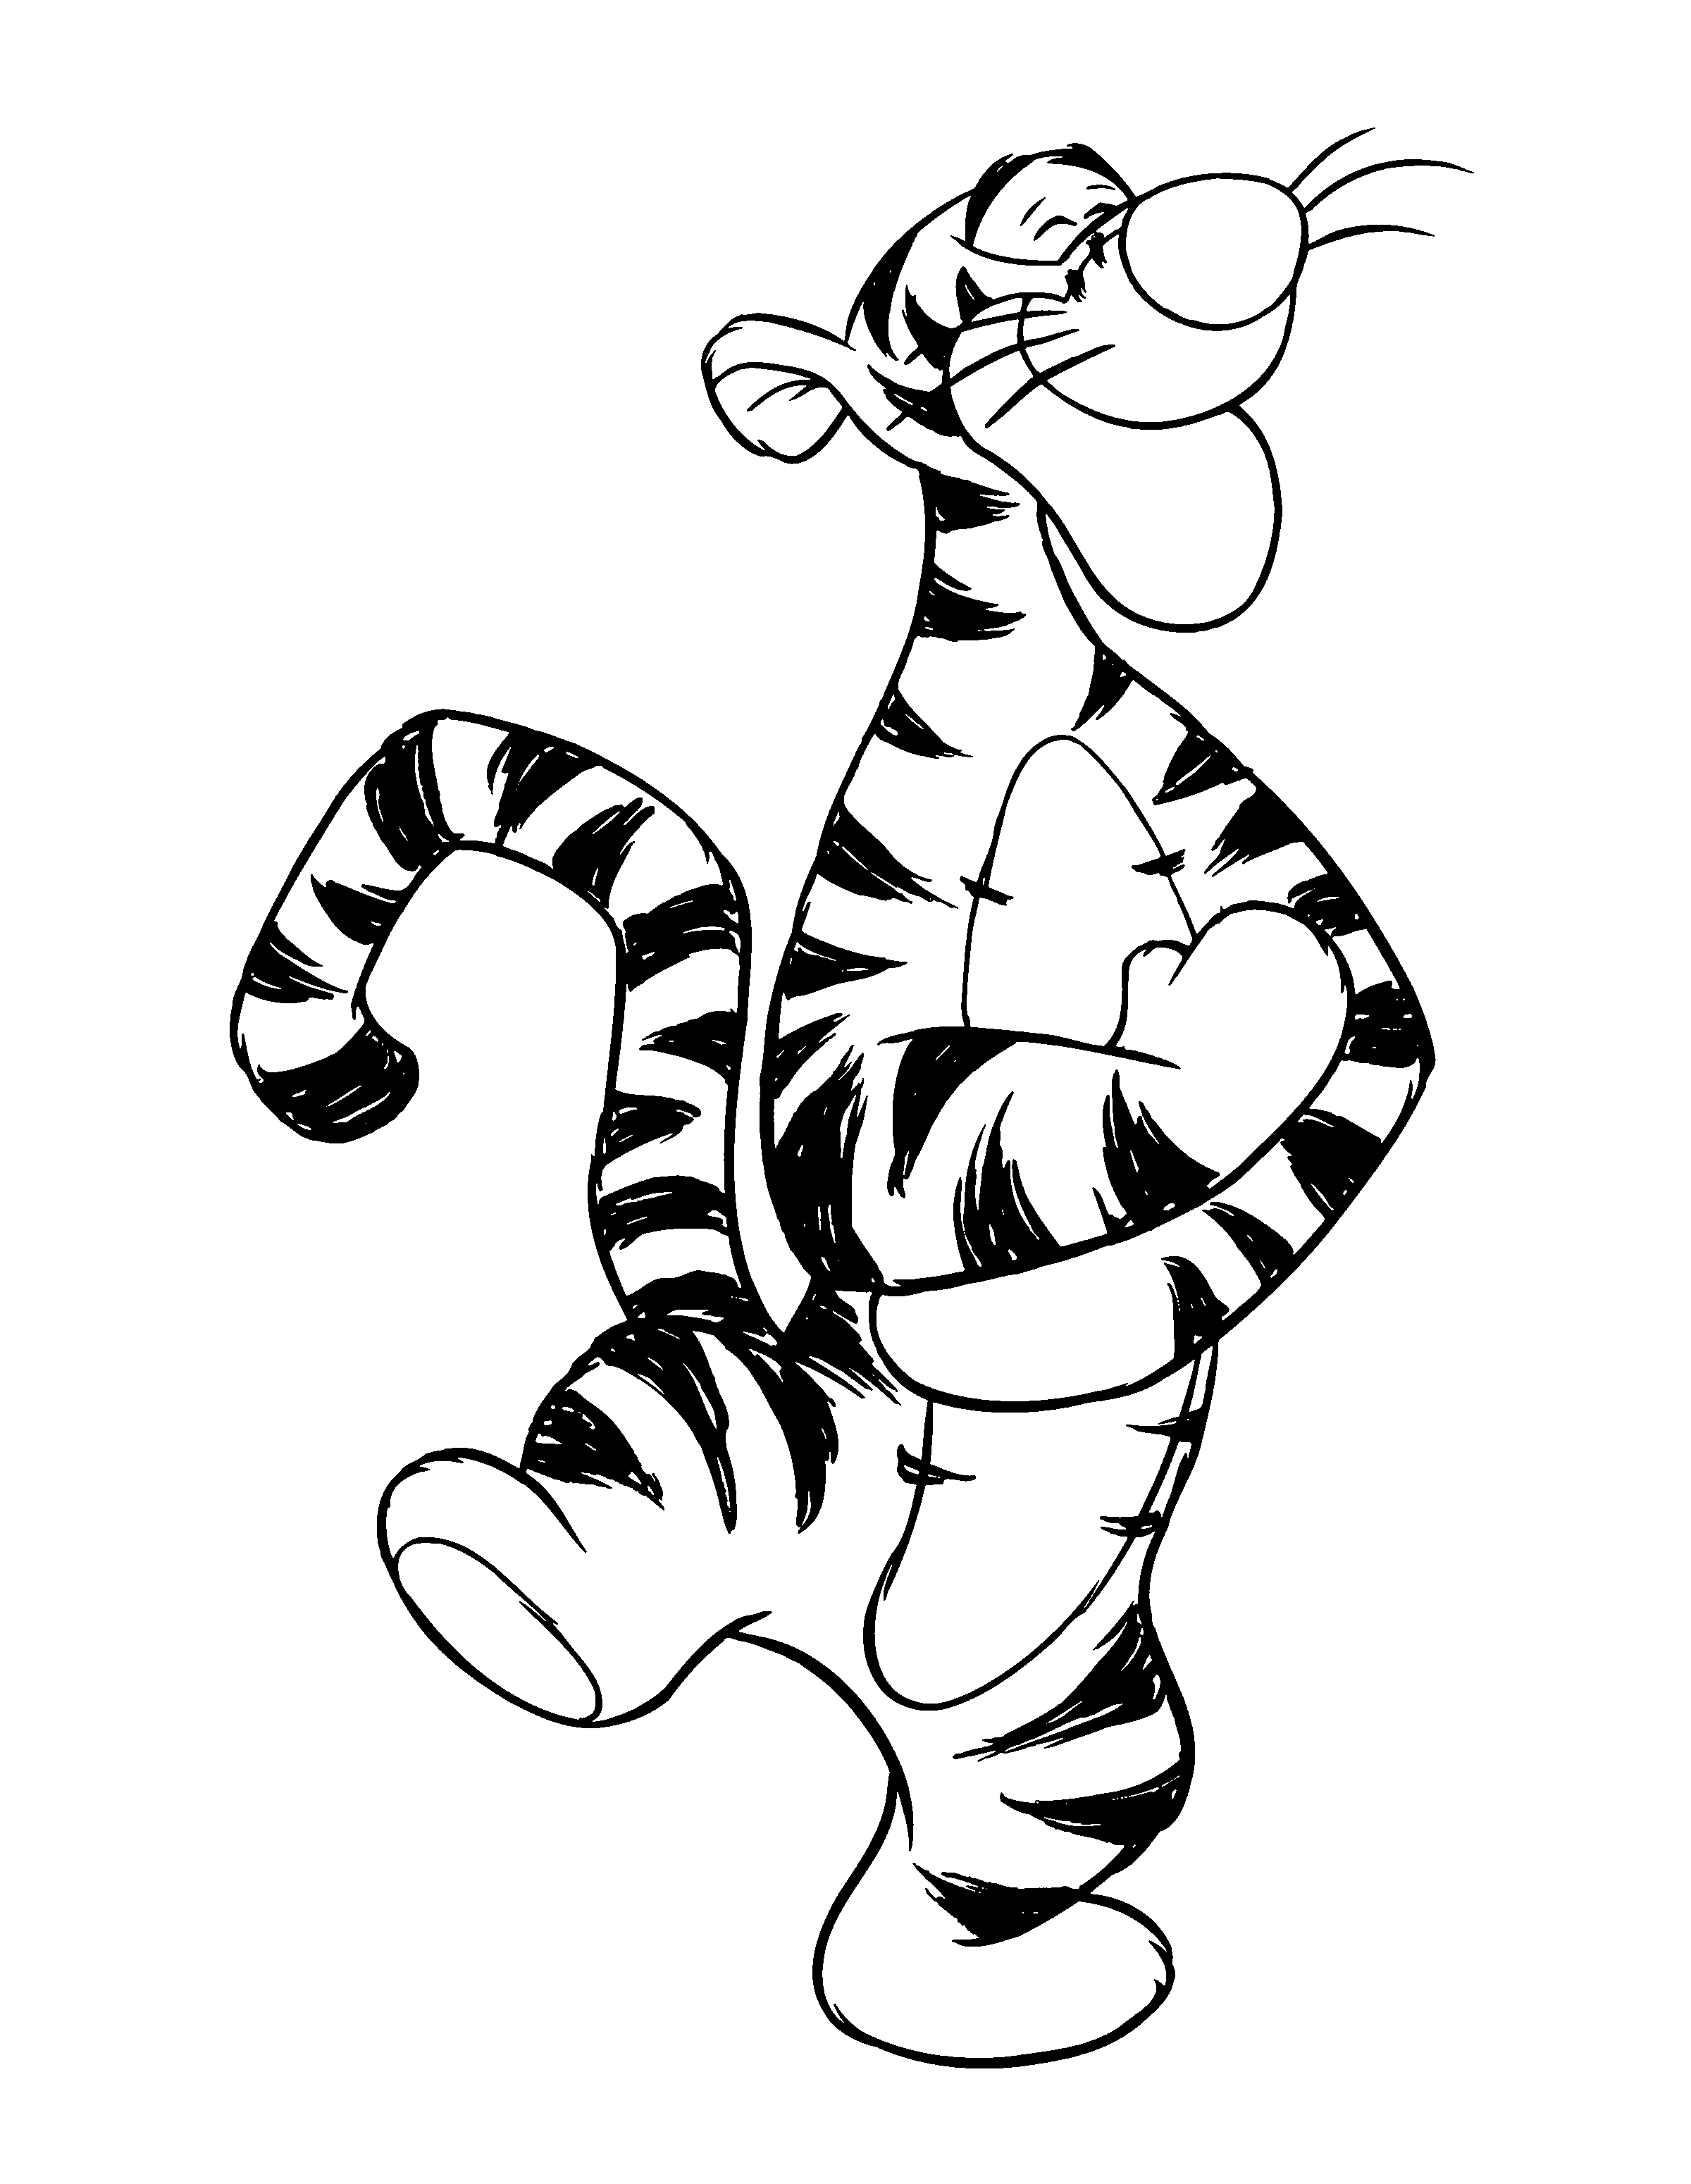 Tigger Winnie the Pooh Coloring Page